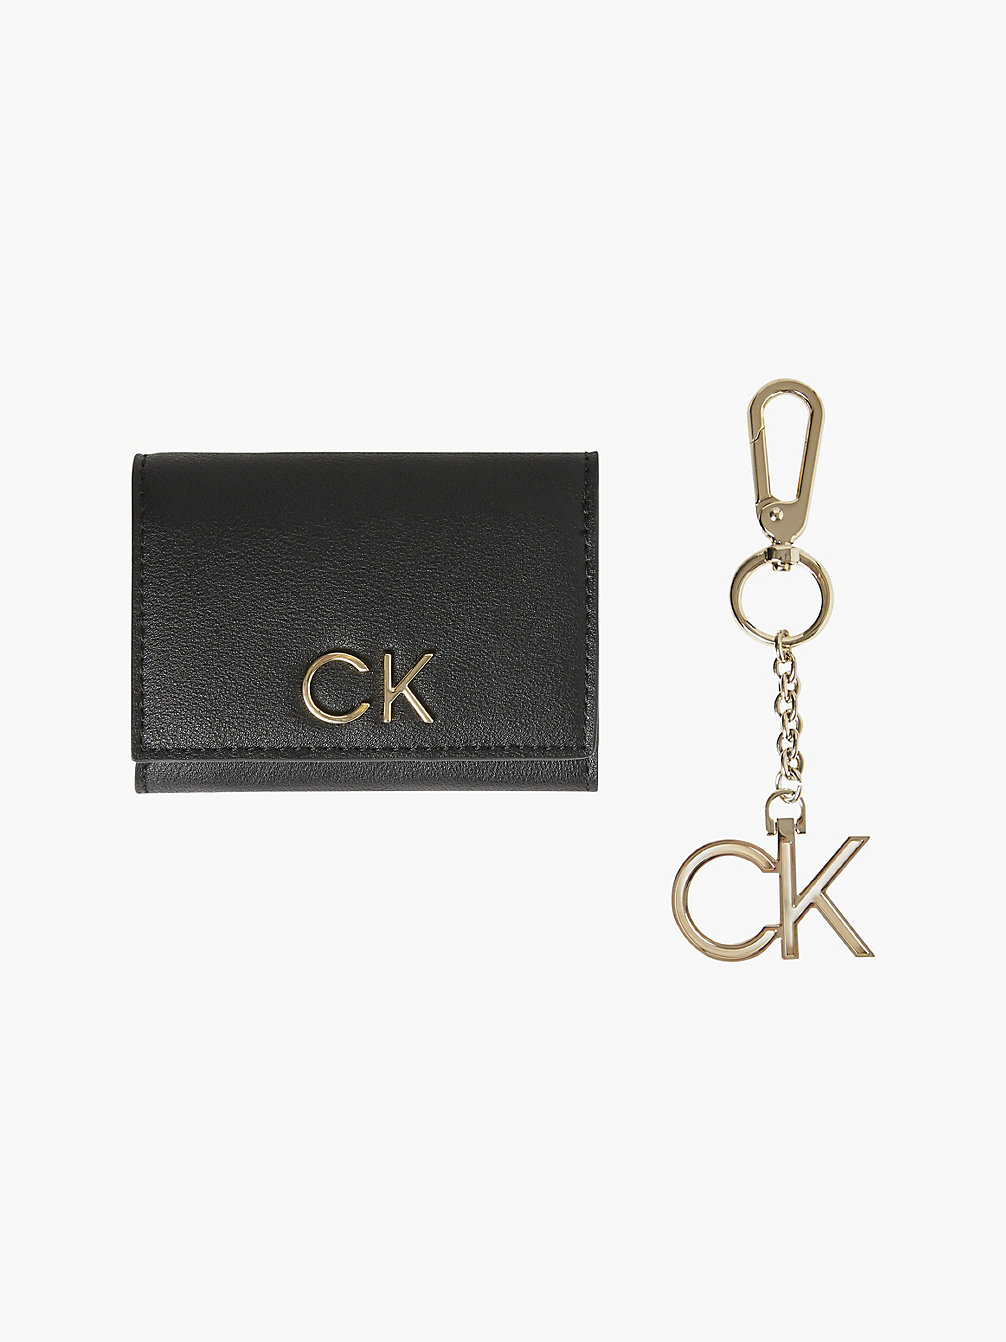 CK BLACK Recycled Rfid Wallet And Keyring Gift Set undefined women Calvin Klein